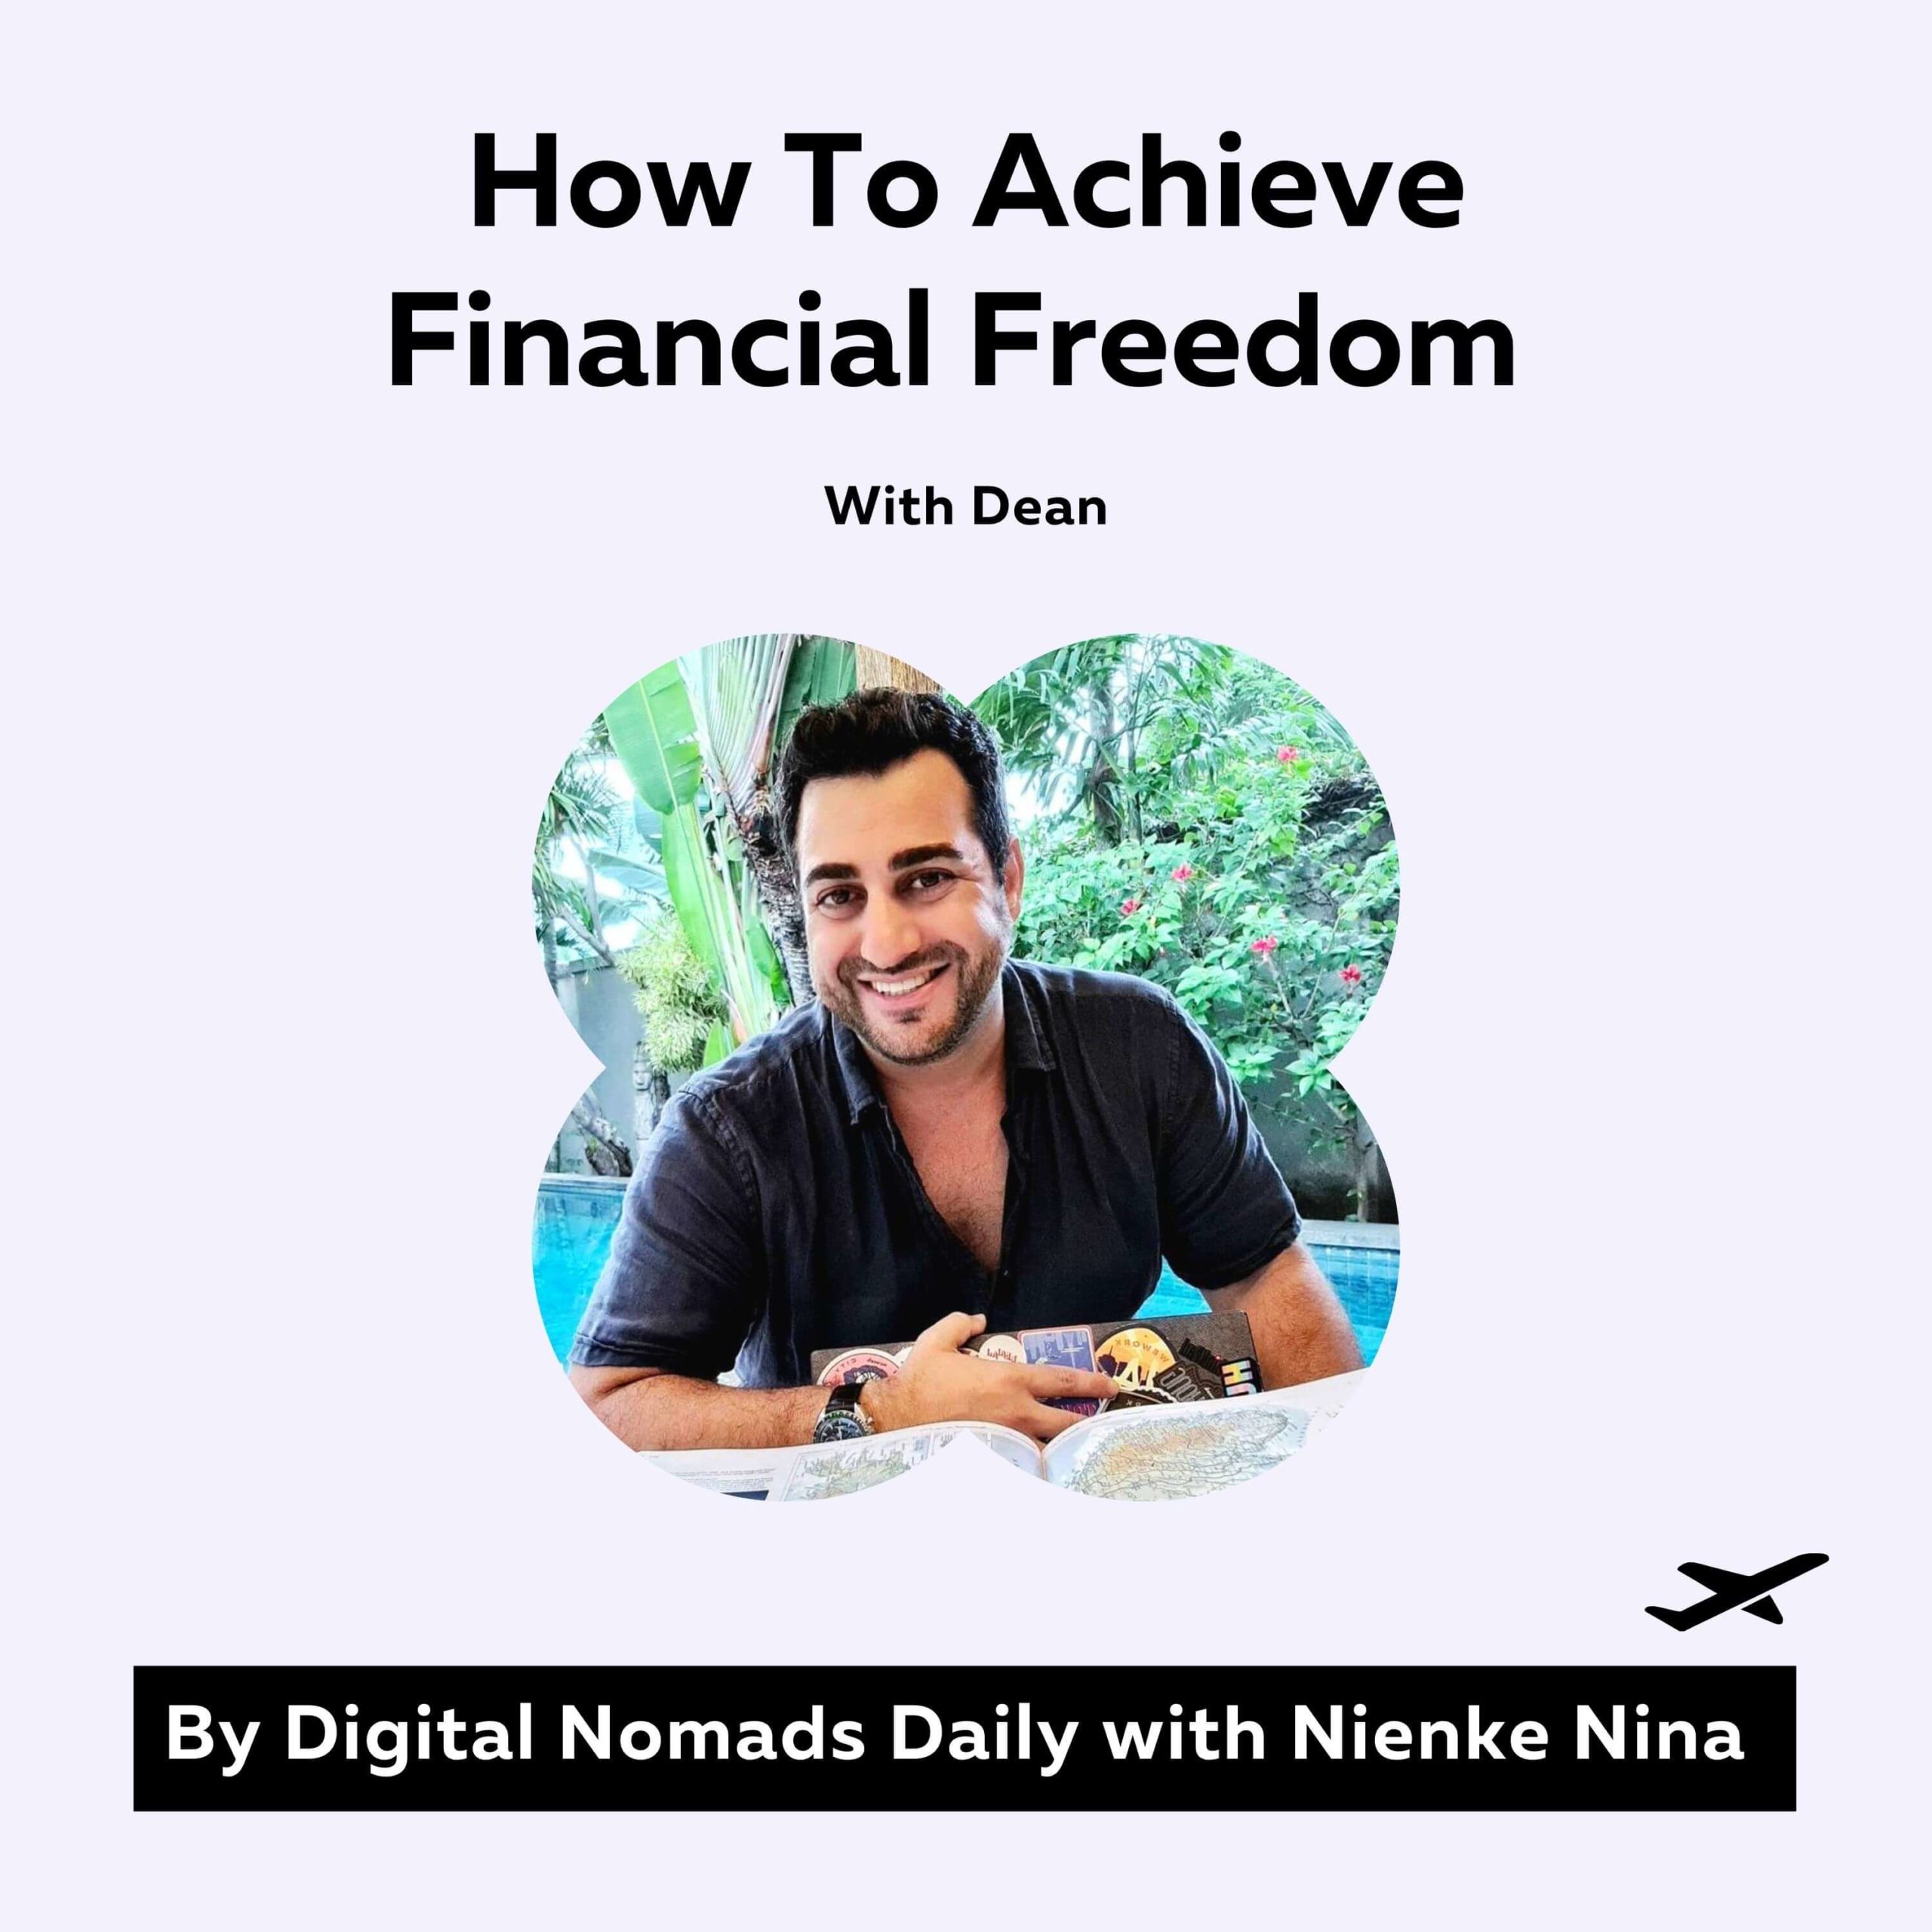 Digital Nomads Daily Podcast Cover photo episode How To Achieve Financial Freedom With Digital Nomad Dean